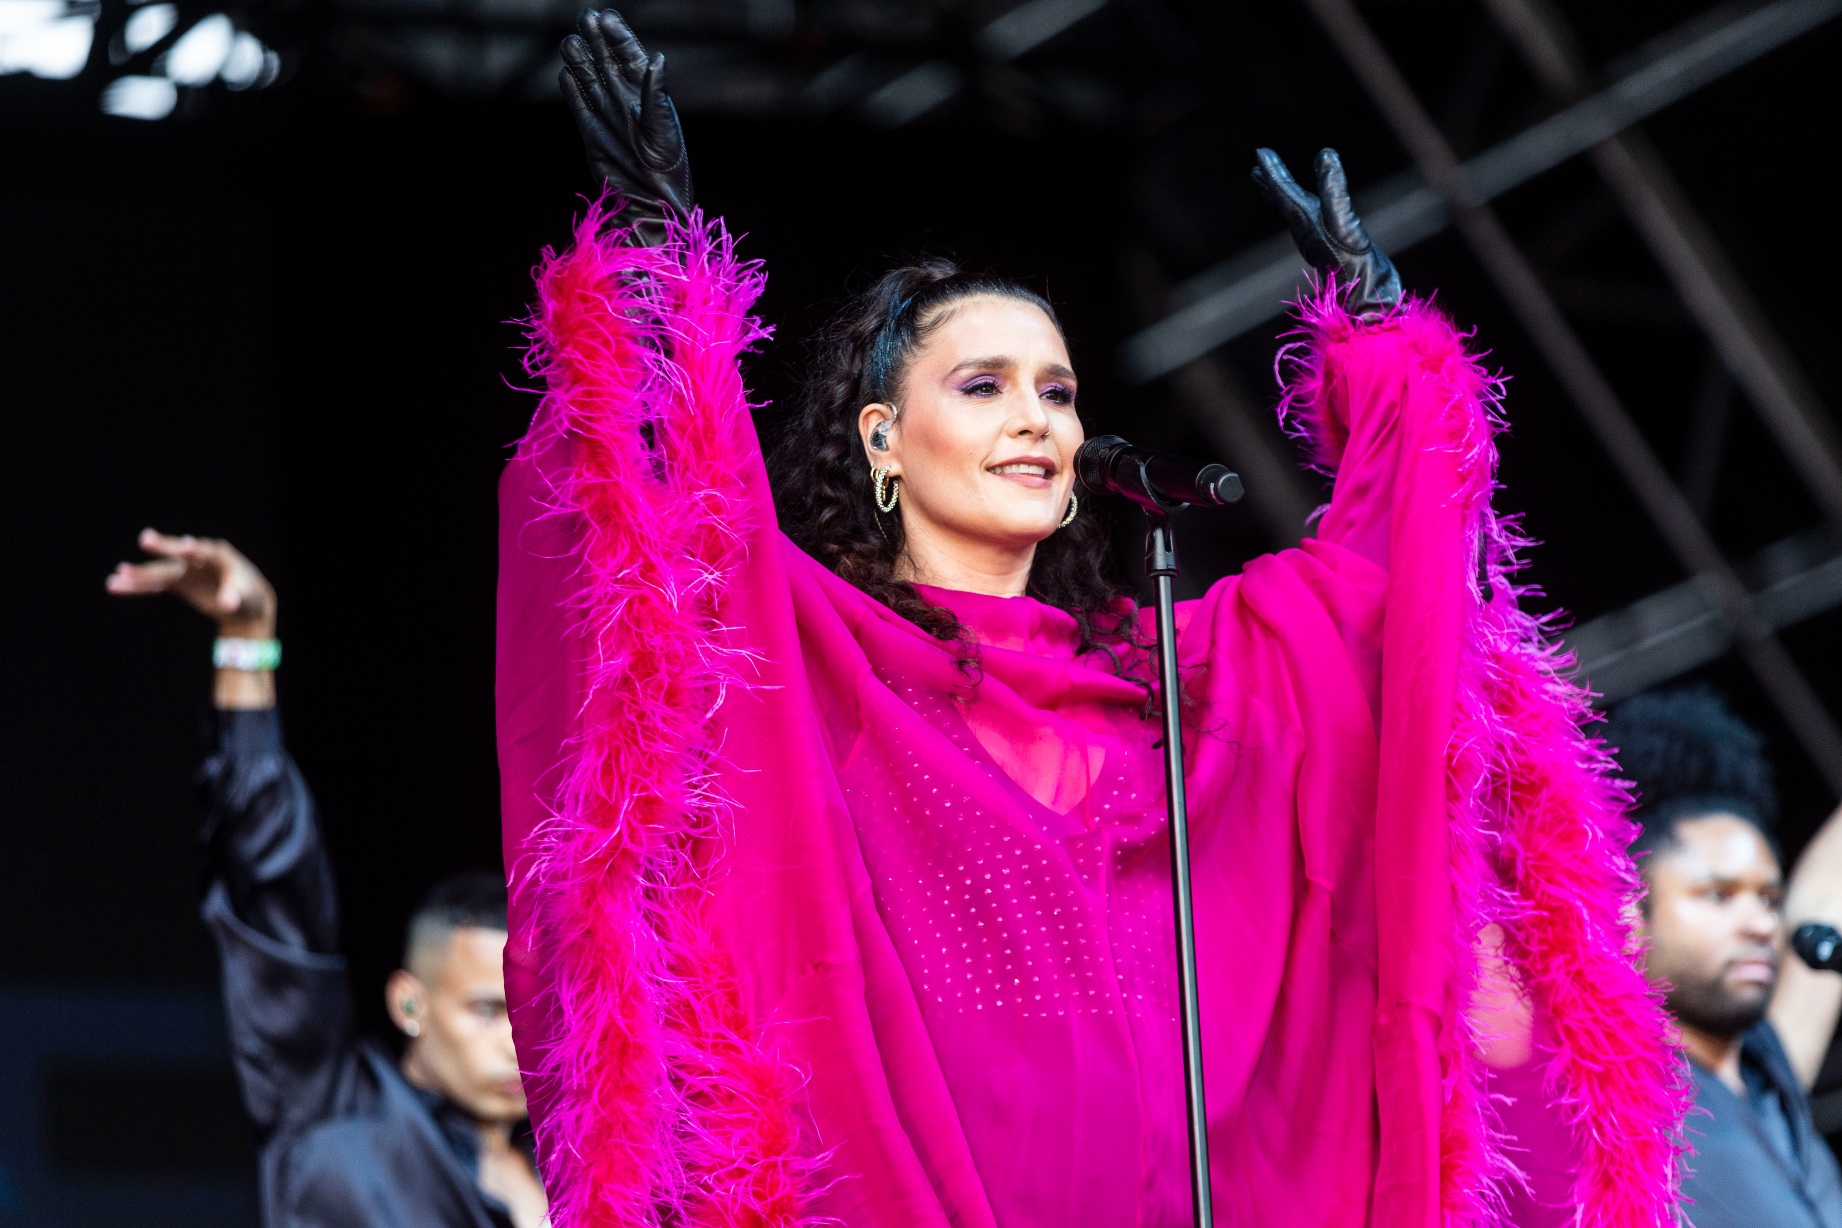 singer Jessie Ware onstage at Mighty Hoopla